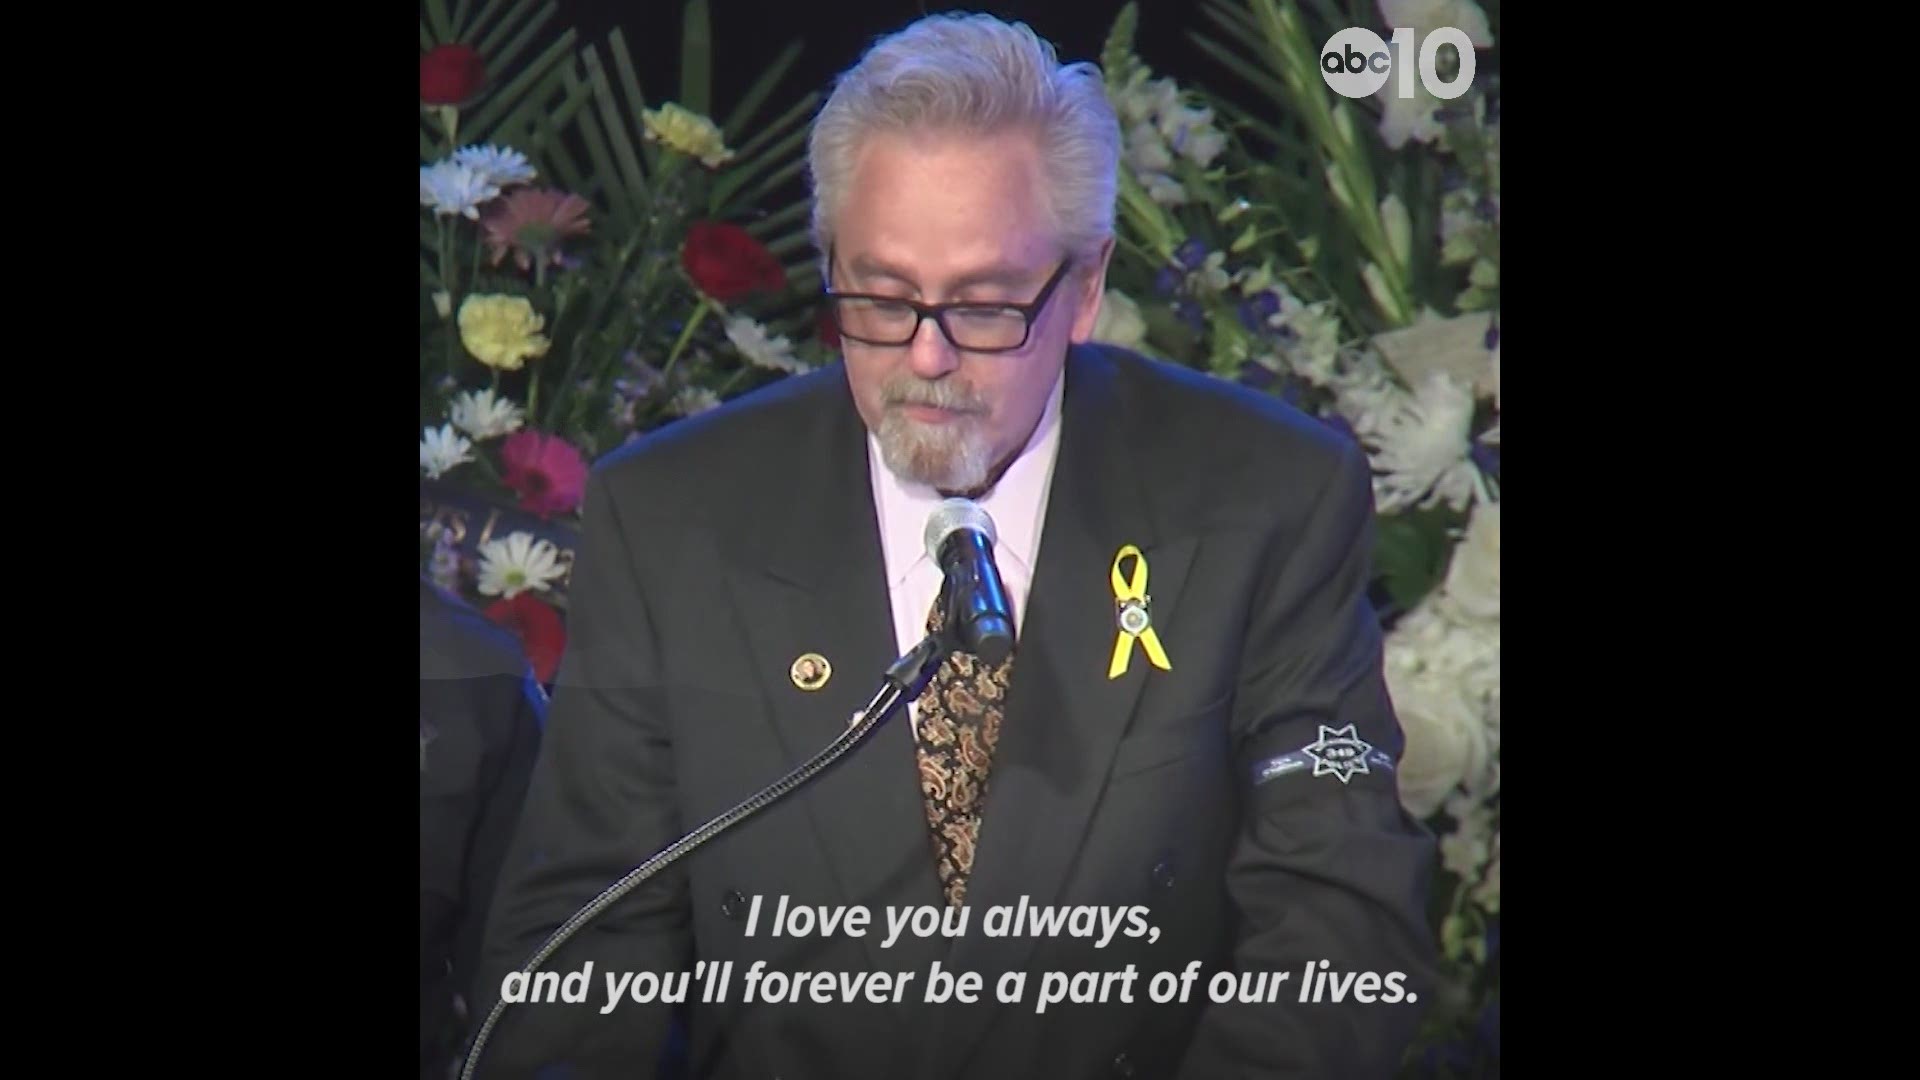 On the advice of Tara O'Sullivan's father, Denis, her godfather Gary Roush said he will choose to remember the positive impact she made on the world while she was in it - not the things that she will no longer get to do. "I love you always," Roush said at the fallen officer's funeral Thursday. "And you will forever be a part of our lives."